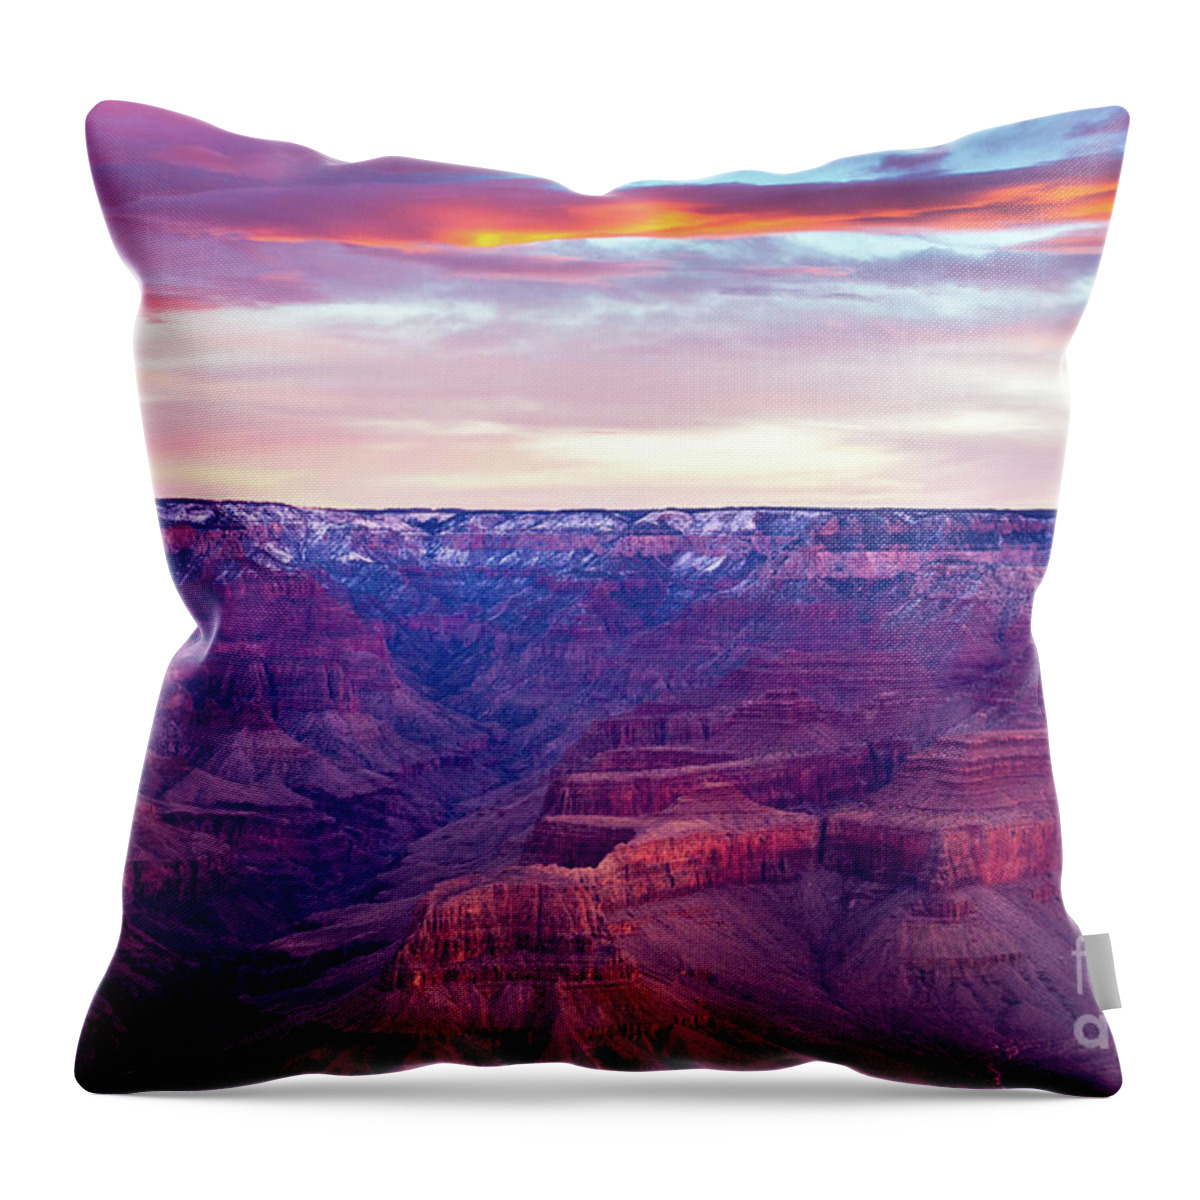 Tinas Captured Moments Throw Pillow featuring the photograph Grand Canyon Sunrise by Tina Hailey